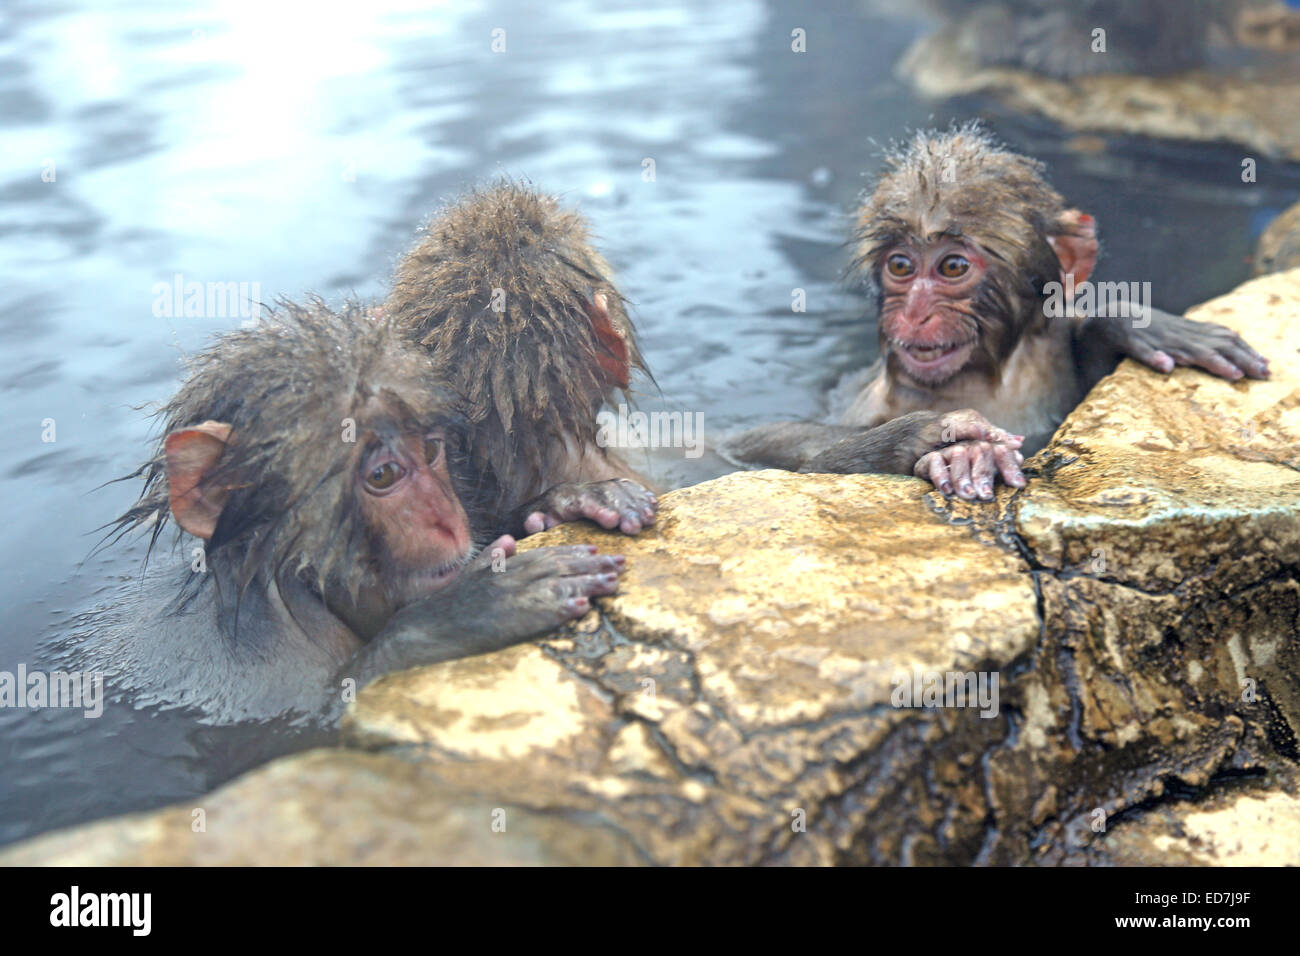 This image of Japanese Macaque relaxing in an onsen was captured in Nagano, Japan during the winter of 2014. Stock Photo